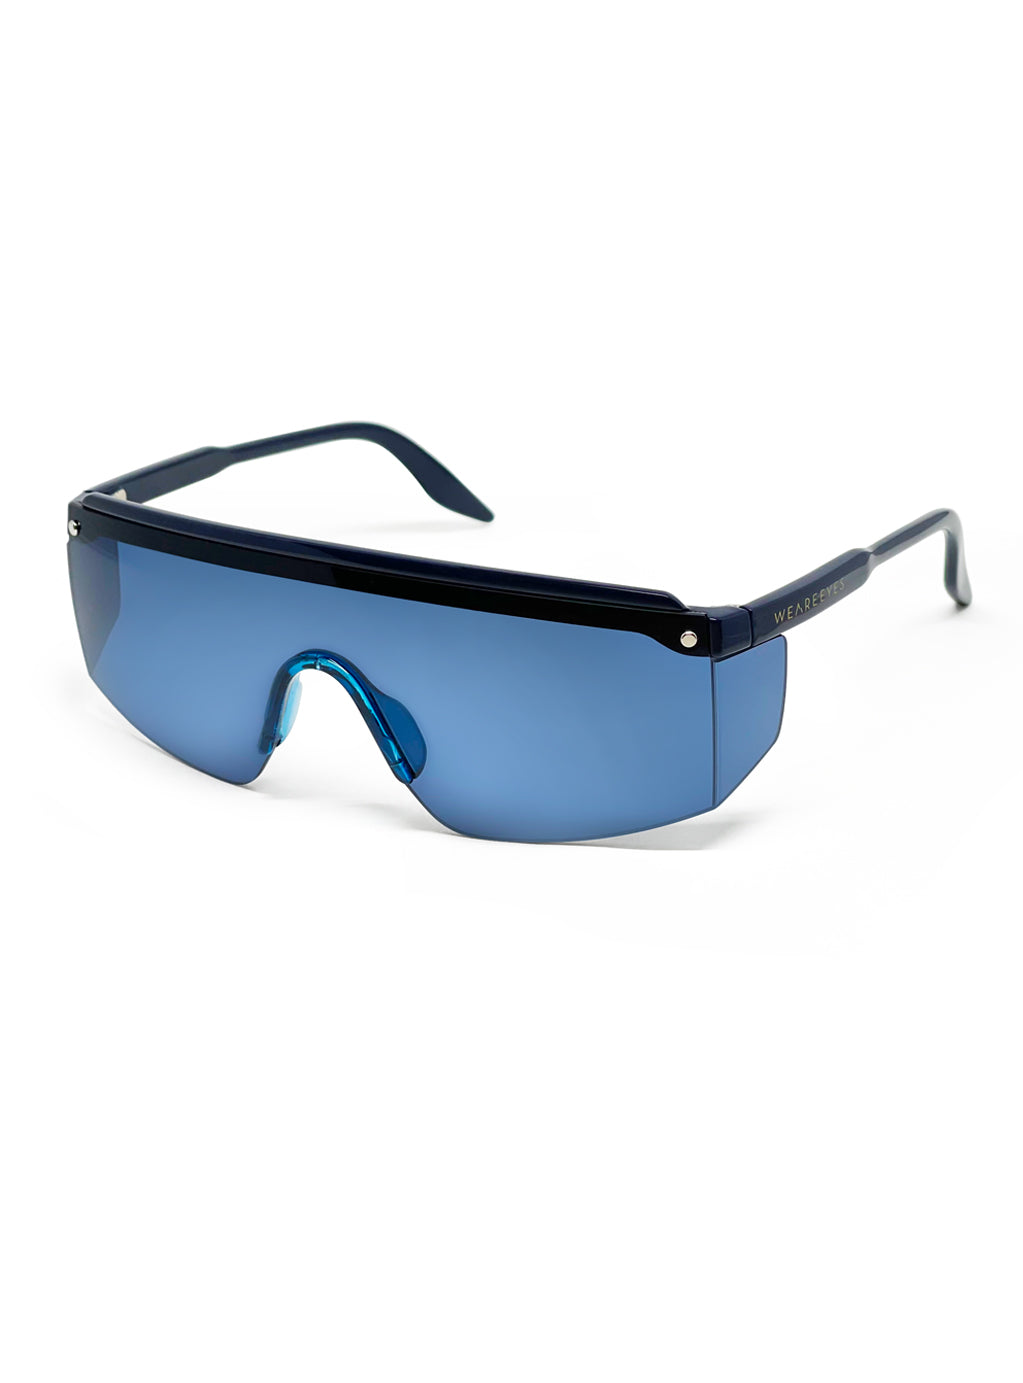 Broad M Blue with Blue Lenses